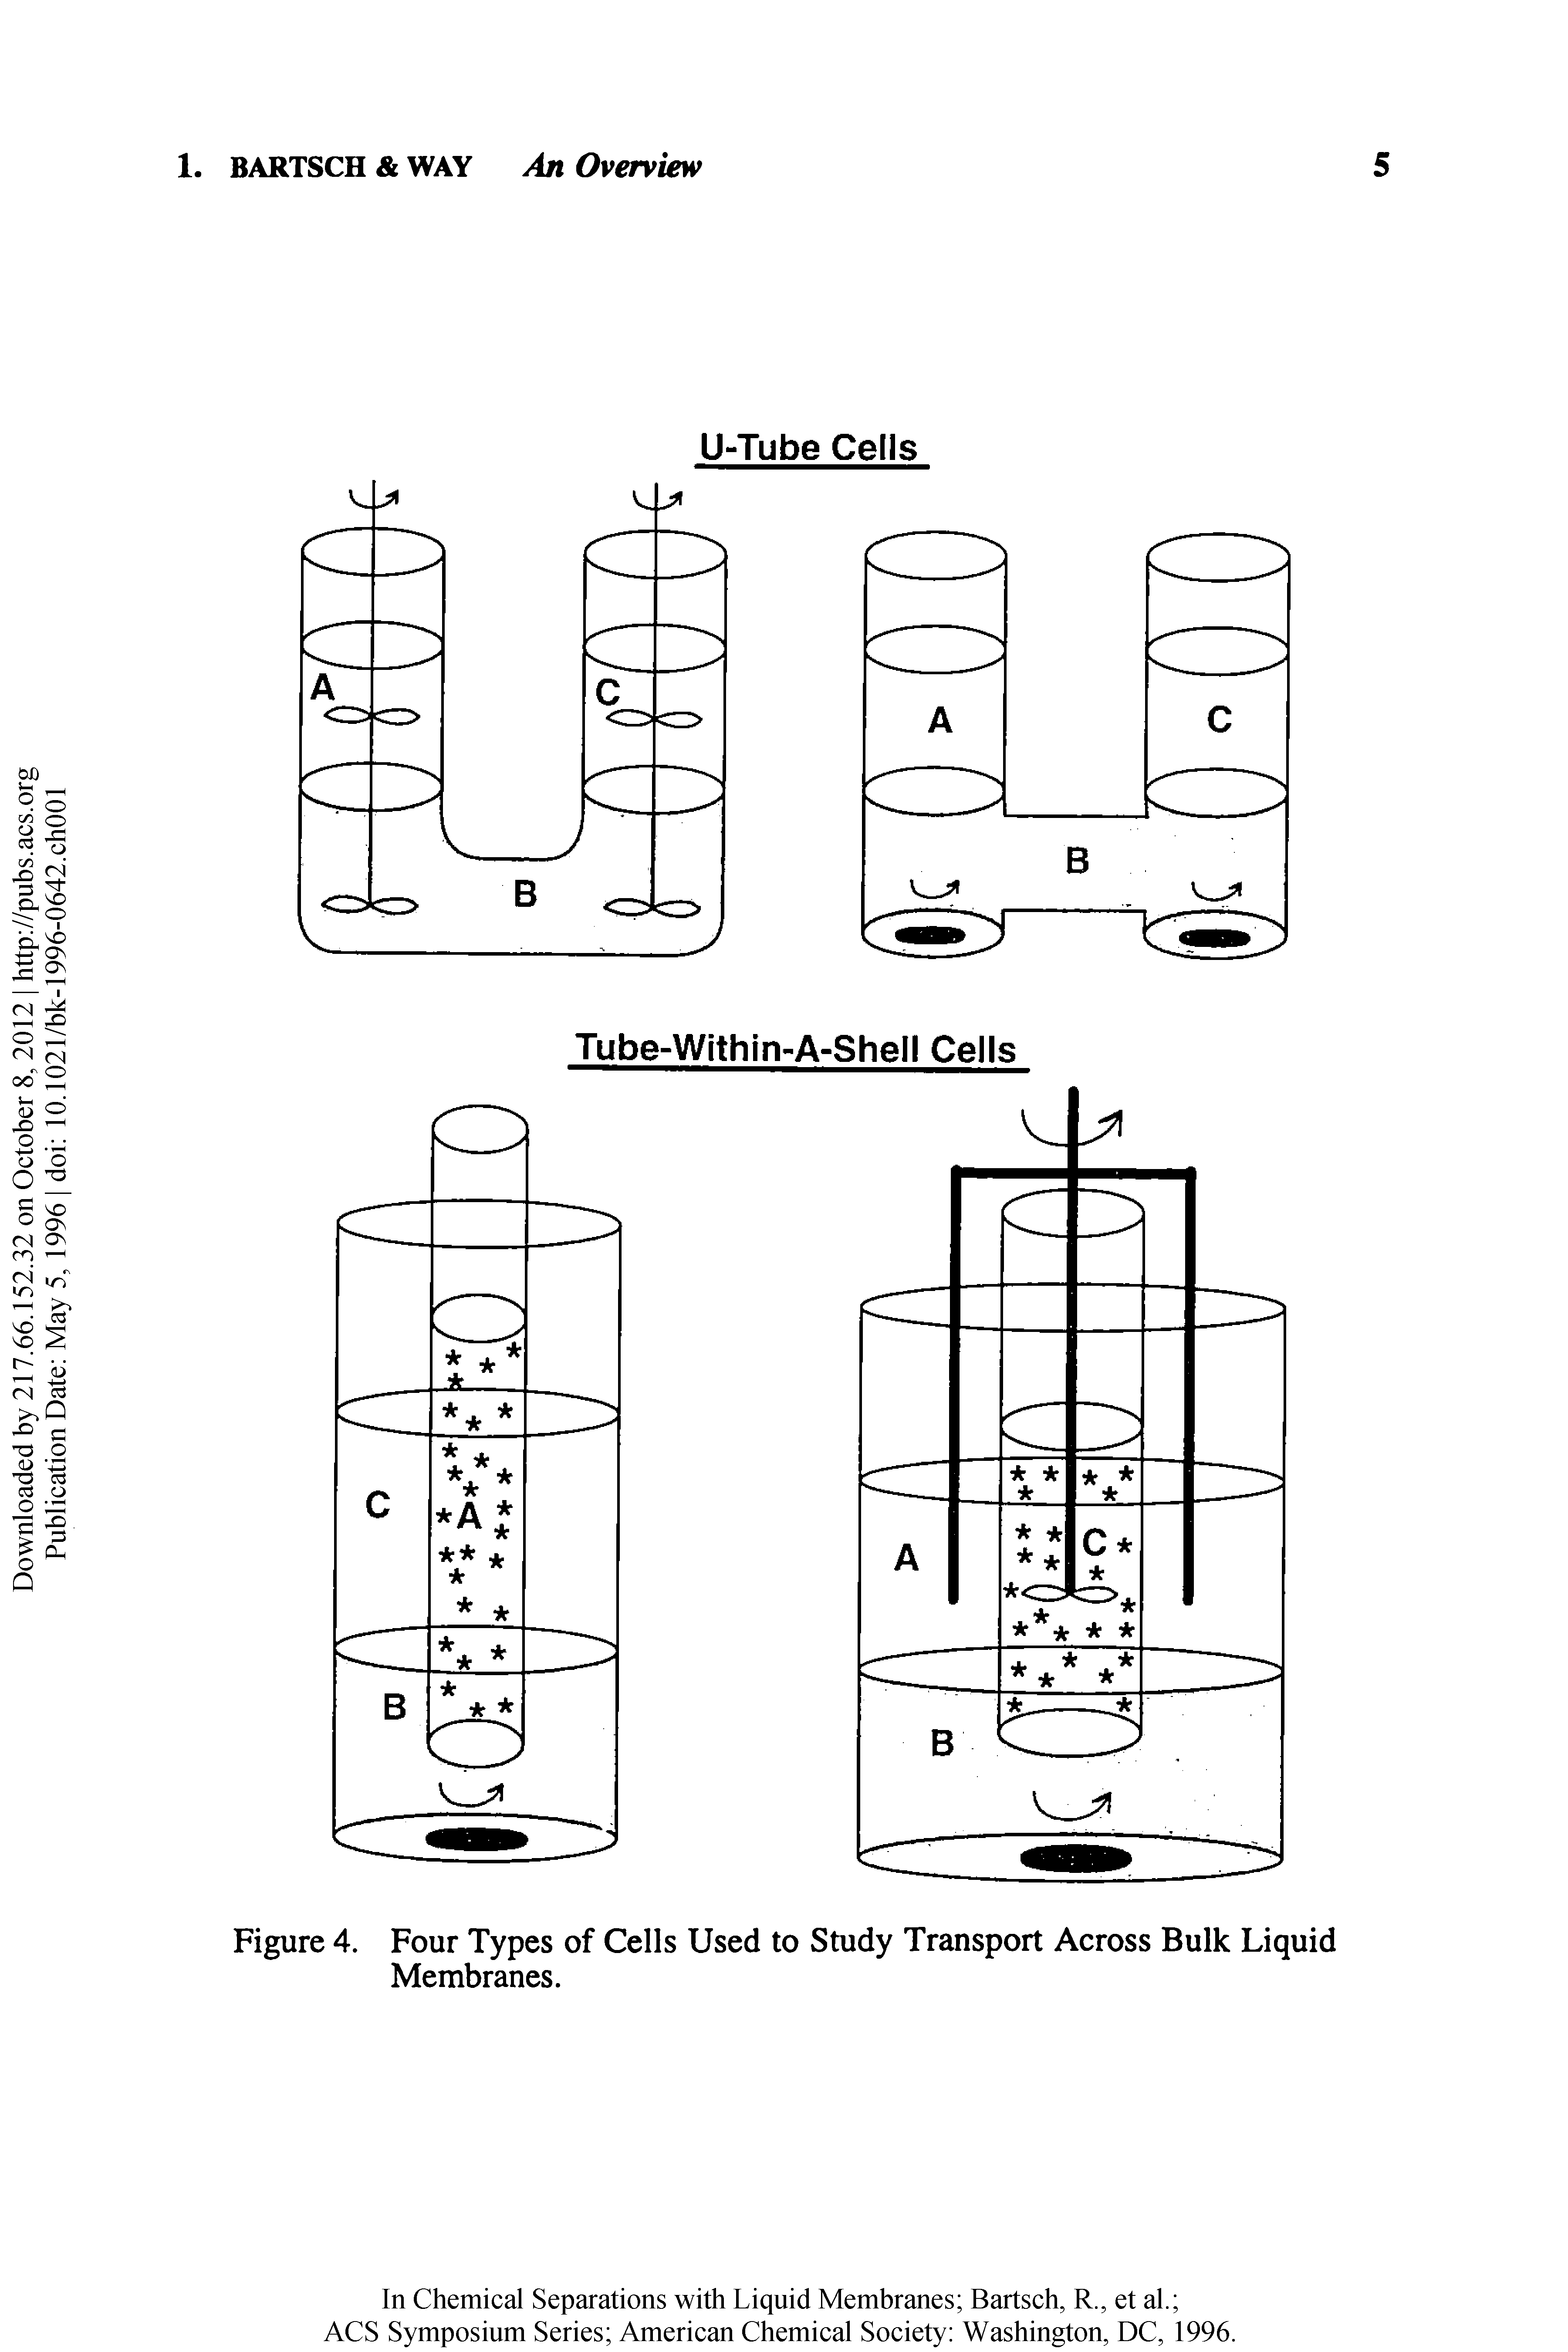 Figure 4. Four Types of Cells Used to Study Transport Across Bulk Liquid Membranes.